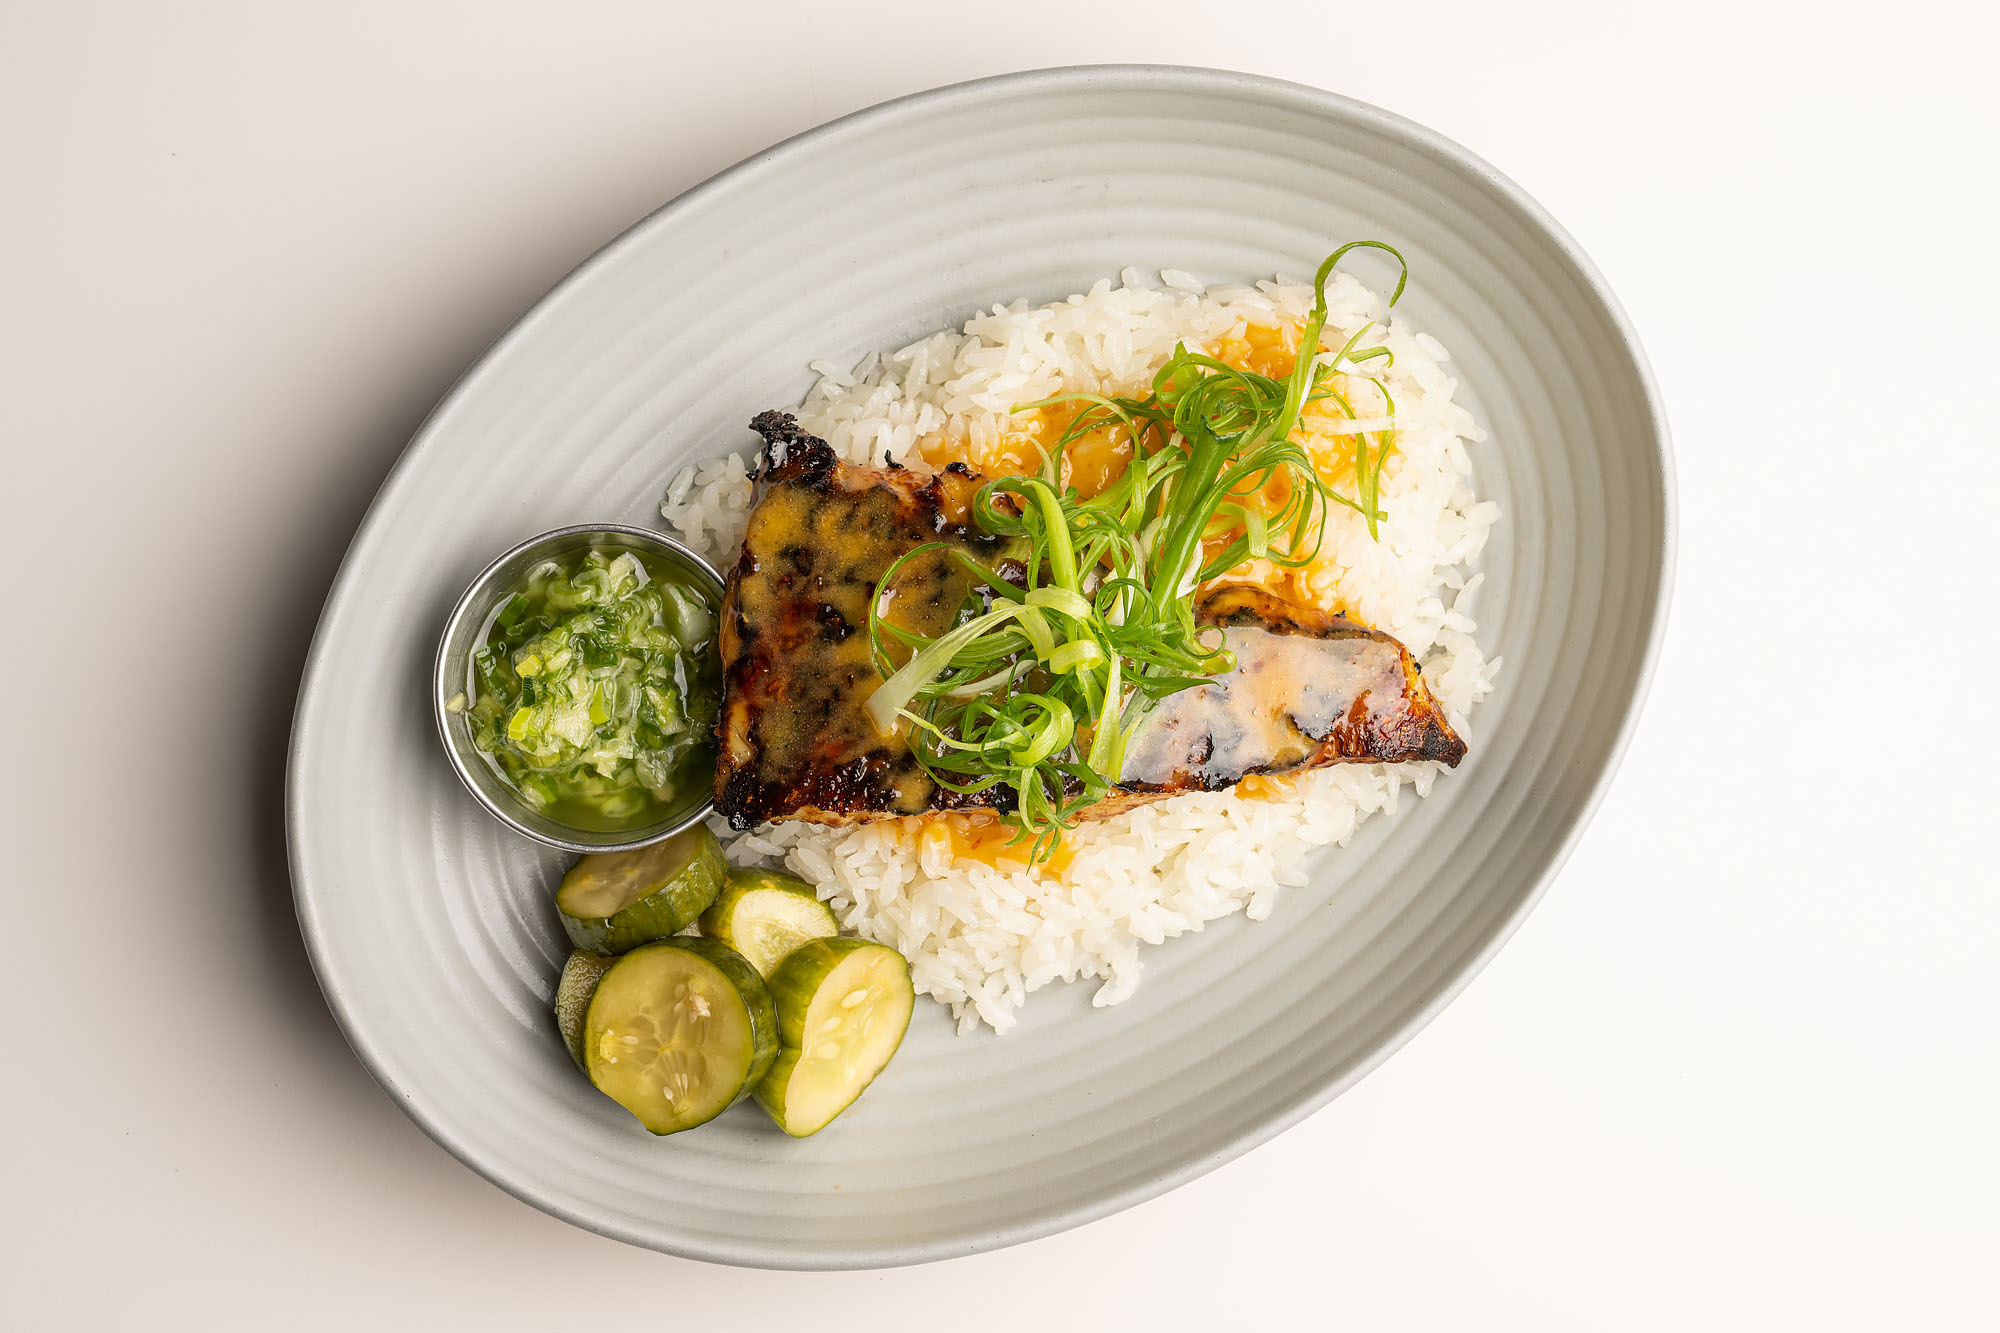 A white plate with white rice, slices of cucumber, a cut of fish covered in an orange sauce, and chopped scallions.